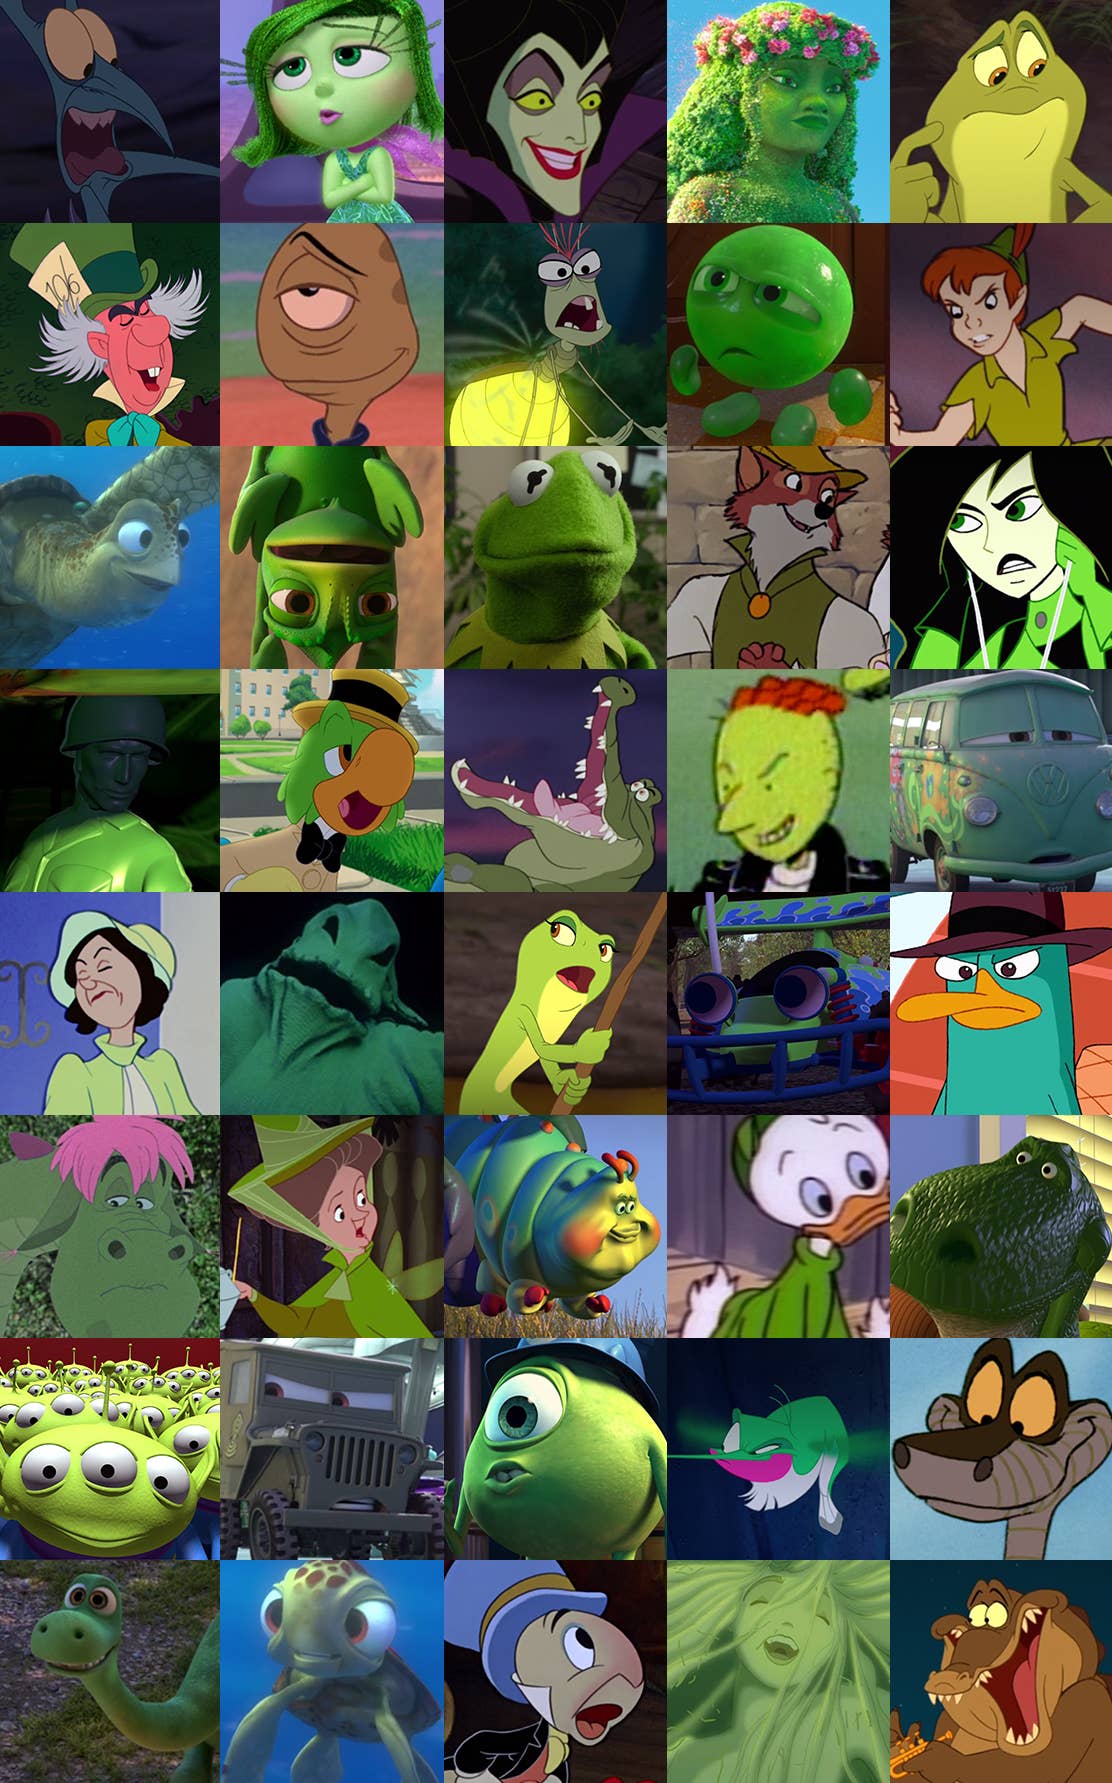 Can You Identify These Green Disney Characters?